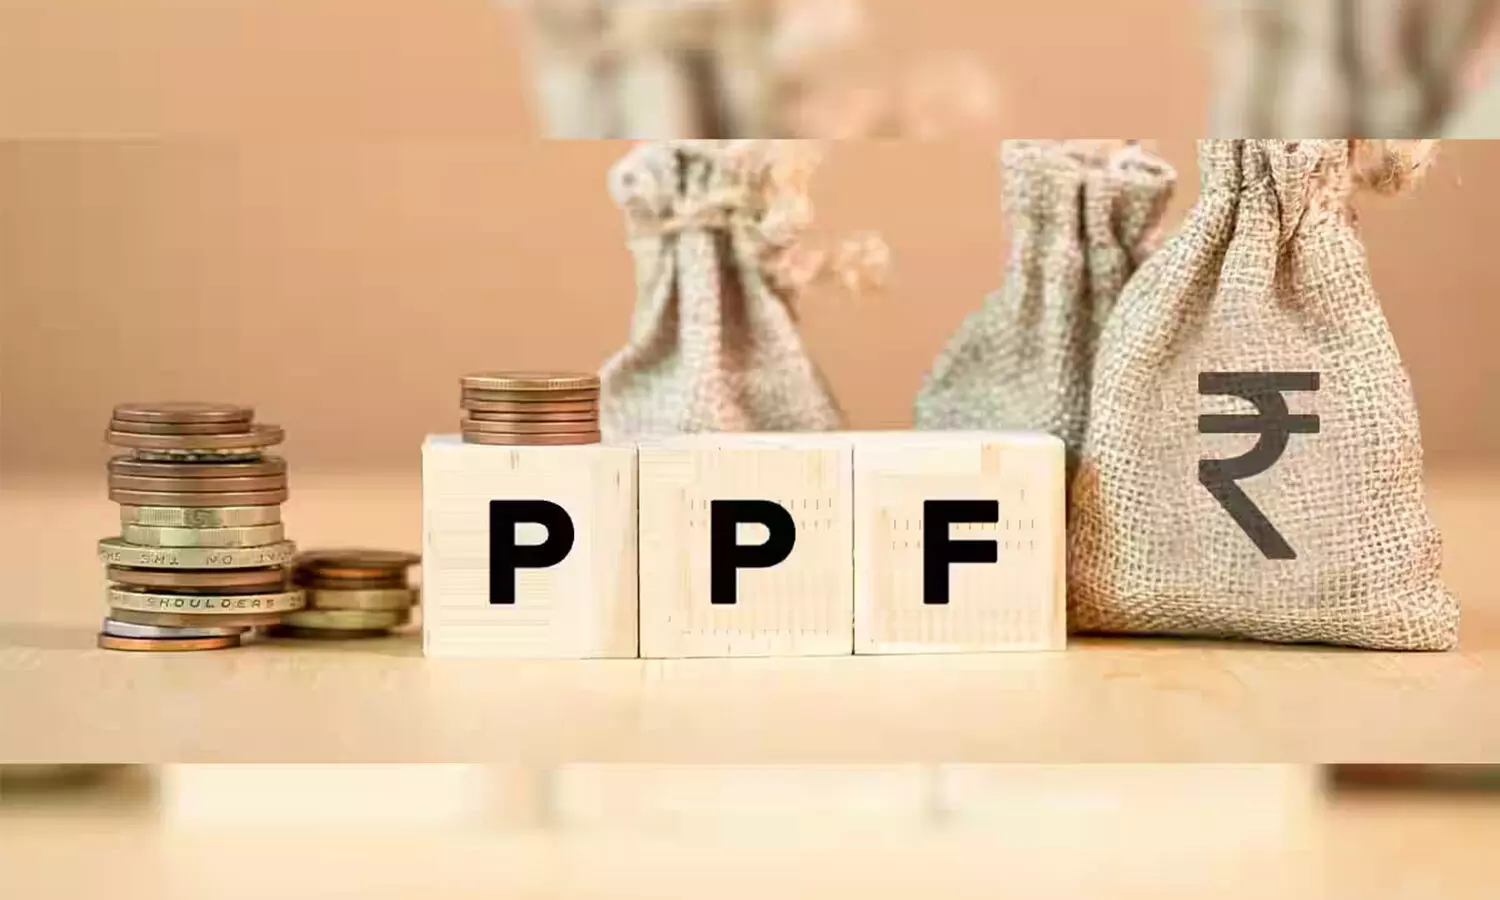 How to invest in PPF? Top benefits of Public Provident Fund, eligible criteria and reliability.